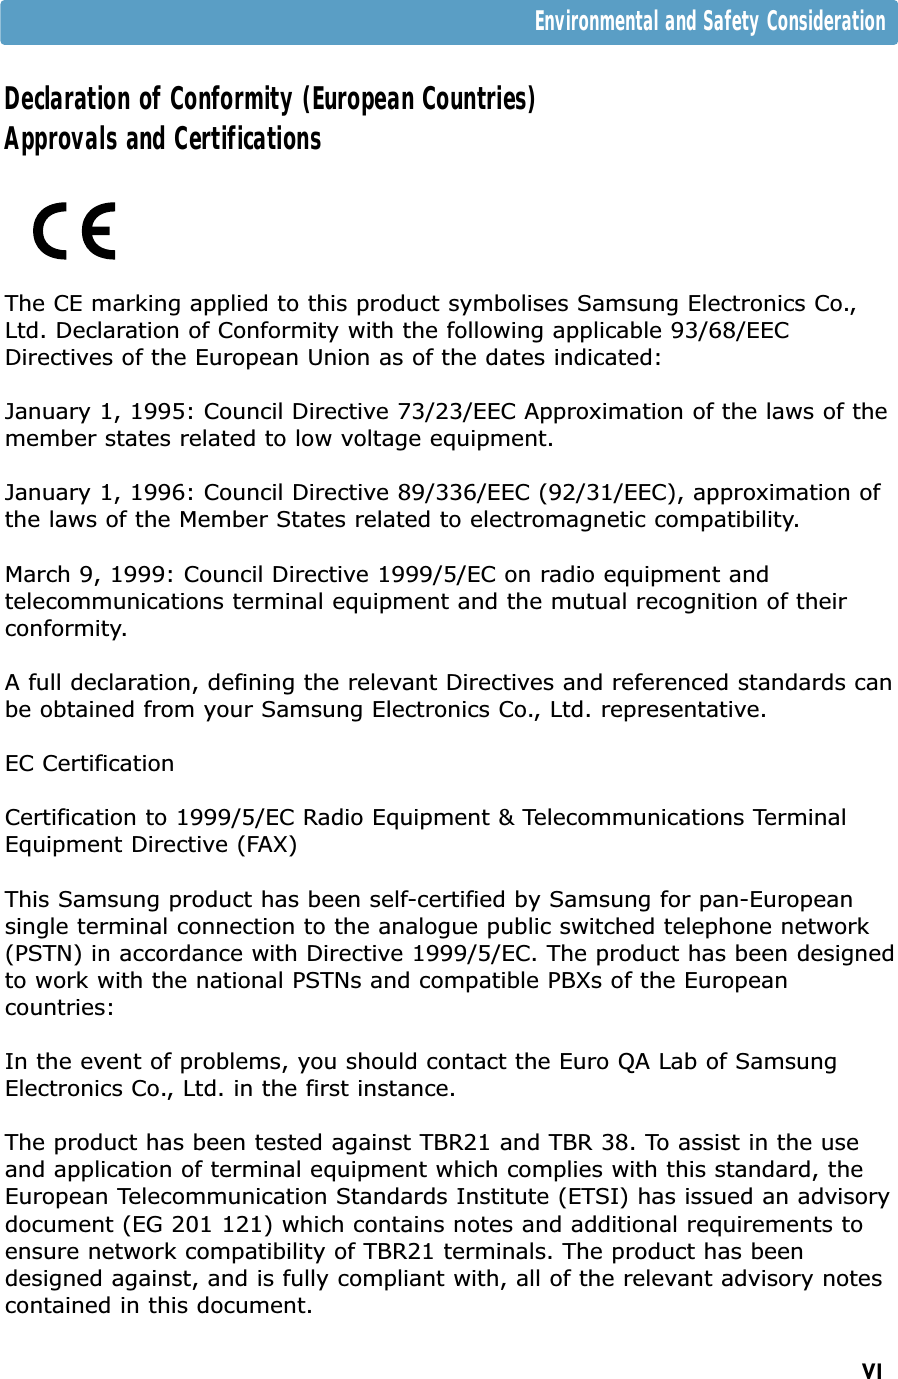 VIEnvironmental and Safety ConsiderationDeclaration of Conformity (European Countries)Approvals and CertificationsThe CE marking applied to this product symbolises Samsung Electronics Co.,Ltd. Declaration of Conformity with the following applicable 93/68/EECDirectives of the European Union as of the dates indicated:January 1, 1995: Council Directive 73/23/EEC Approximation of the laws of themember states related to low voltage equipment.January 1, 1996: Council Directive 89/336/EEC (92/31/EEC), approximation ofthe laws of the Member States related to electromagnetic compatibility.March 9, 1999: Council Directive 1999/5/EC on radio equipment andtelecommunications terminal equipment and the mutual recognition of theirconformity.A full declaration, defining the relevant Directives and referenced standards canbe obtained from your Samsung Electronics Co., Ltd. representative.EC CertificationCertification to 1999/5/EC Radio Equipment &amp; Telecommunications TerminalEquipment Directive (FAX)This Samsung product has been self-certified by Samsung for pan-Europeansingle terminal connection to the analogue public switched telephone network(PSTN) in accordance with Directive 1999/5/EC. The product has been designedto work with the national PSTNs and compatible PBXs of the Europeancountries:In the event of problems, you should contact the Euro QA Lab of SamsungElectronics Co., Ltd. in the first instance.The product has been tested against TBR21 and TBR 38. To assist in the useand application of terminal equipment which complies with this standard, theEuropean Telecommunication Standards Institute (ETSI) has issued an advisorydocument (EG 201 121) which contains notes and additional requirements toensure network compatibility of TBR21 terminals. The product has beendesigned against, and is fully compliant with, all of the relevant advisory notescontained in this document.